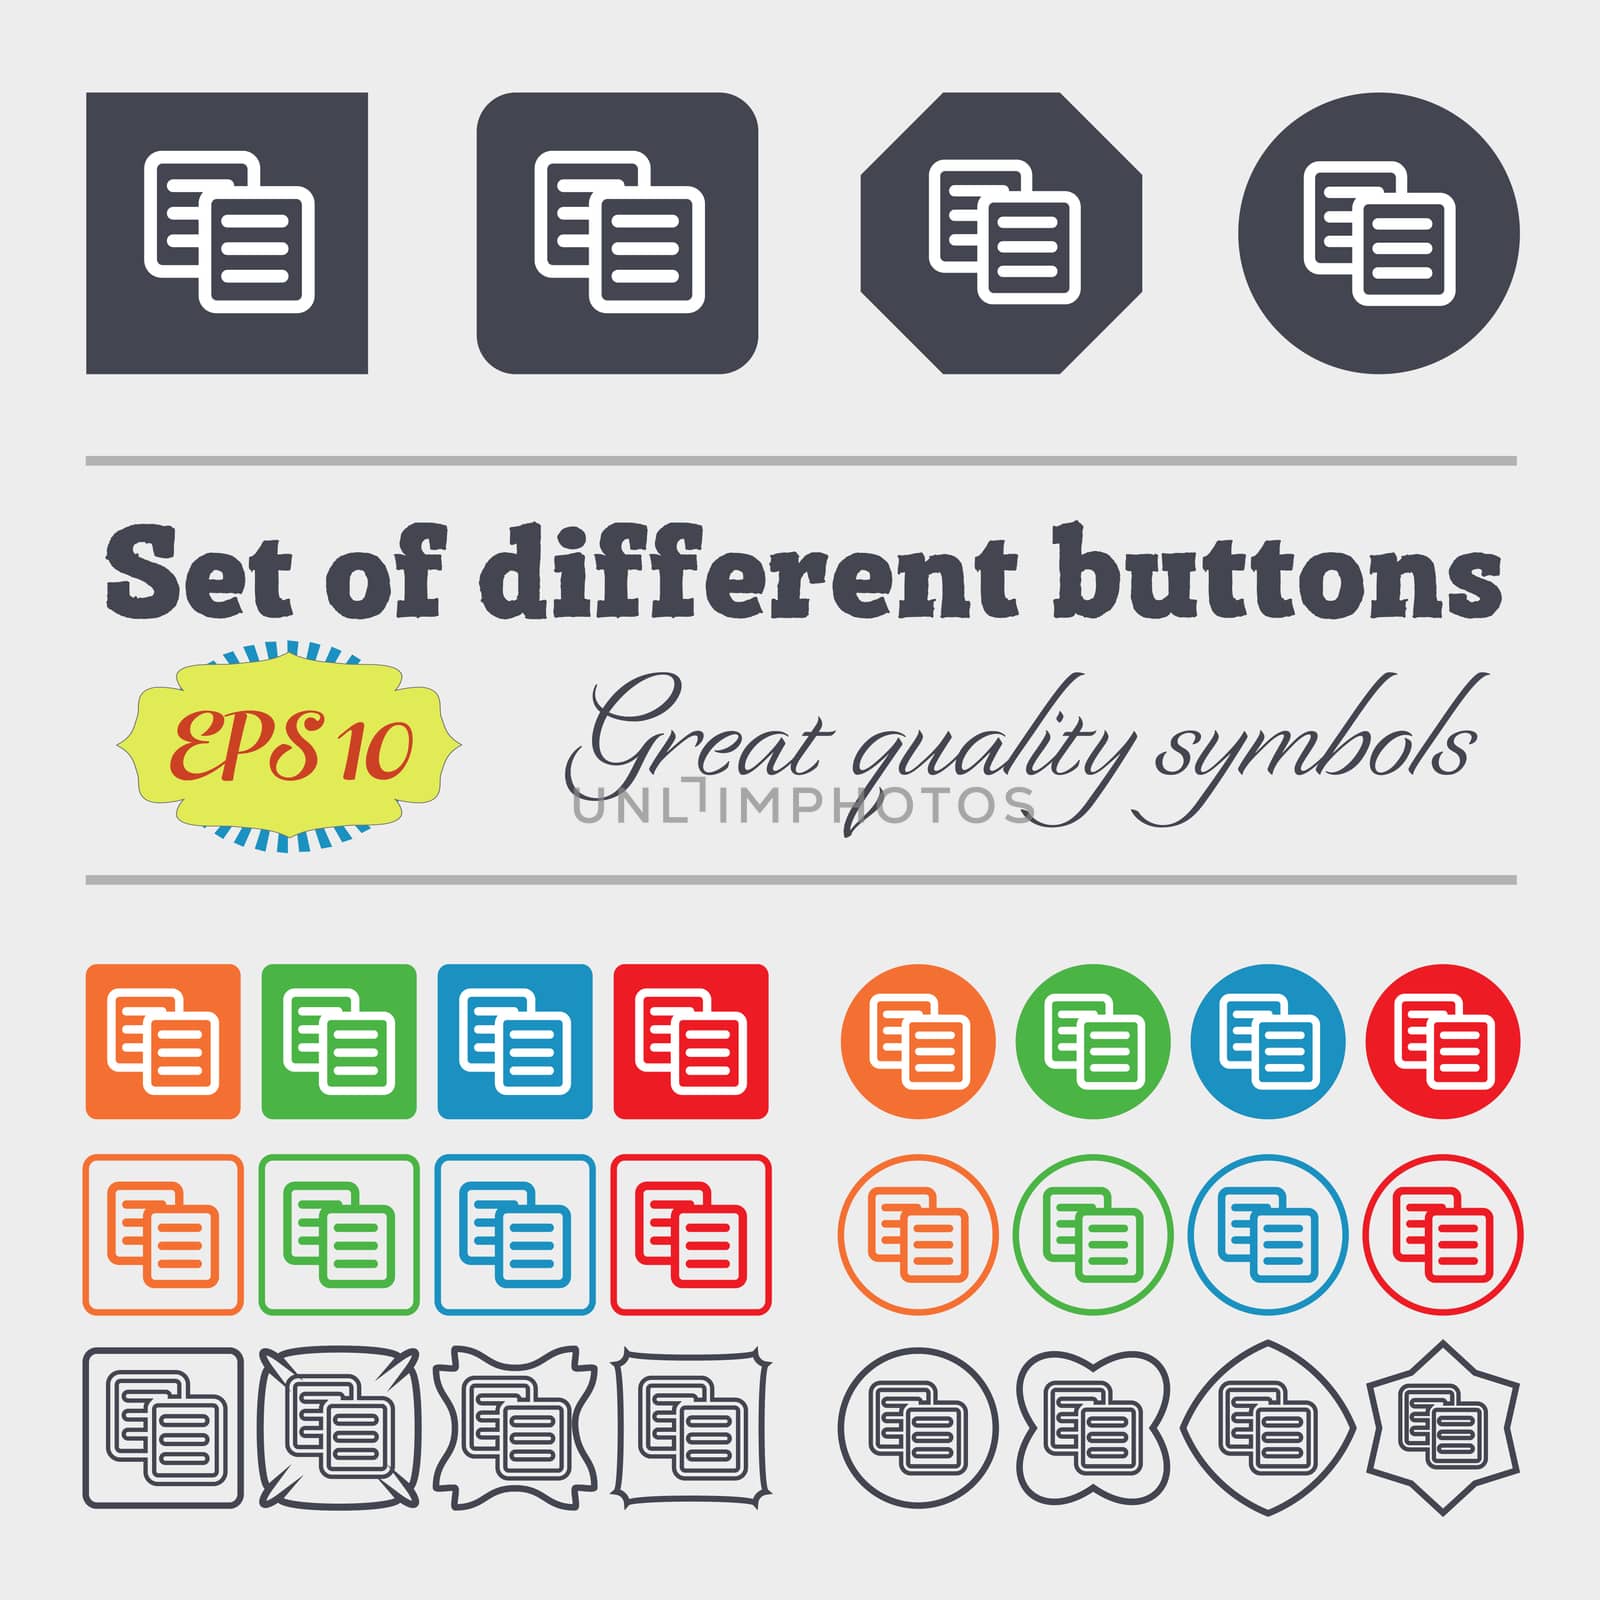 copy icon sign. Big set of colorful, diverse, high-quality buttons. illustration